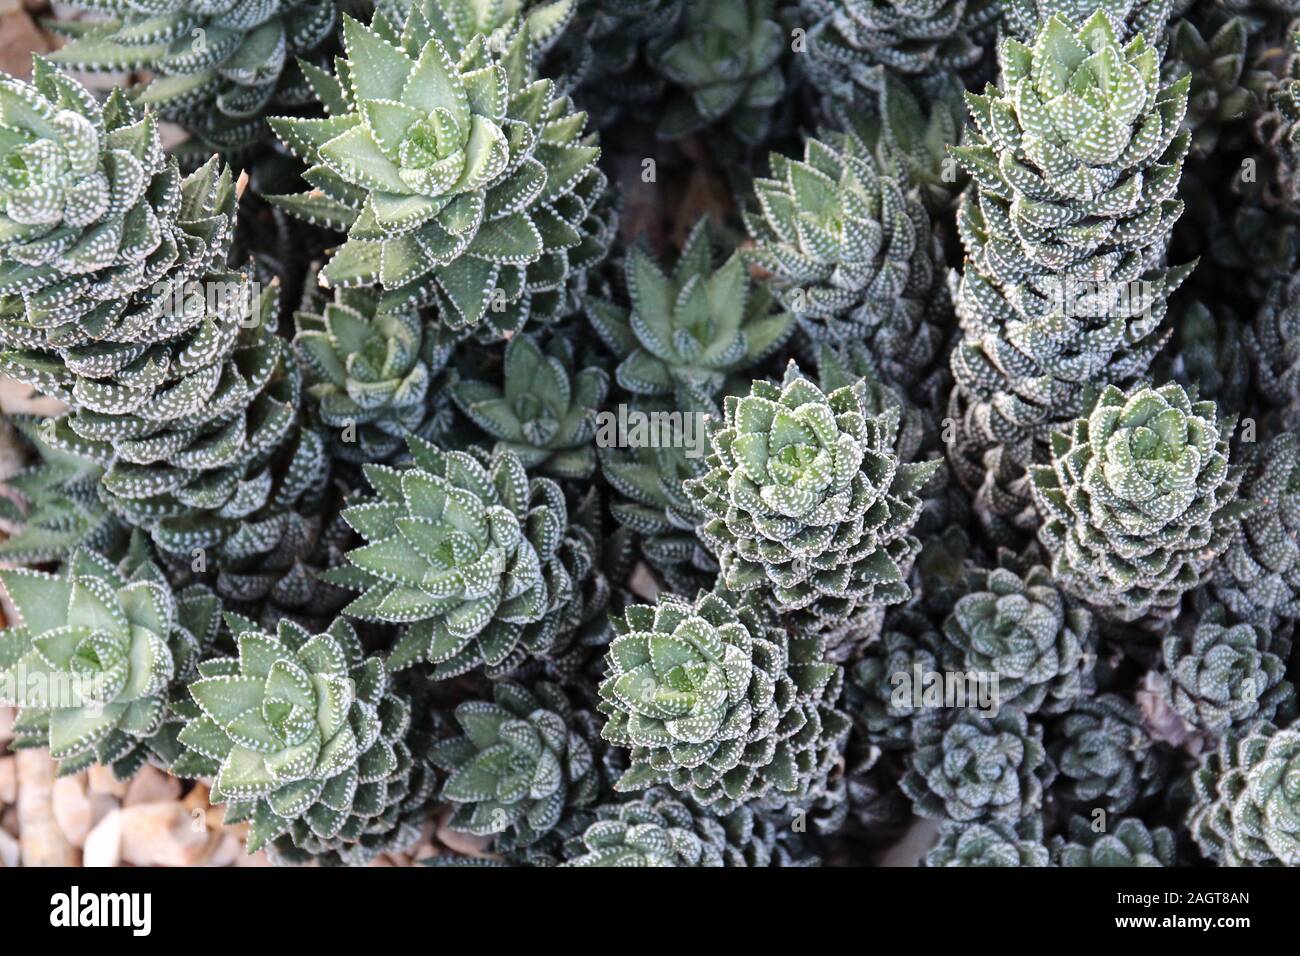 Close up of a cluster of Zebra Wart Plant, Haworthia reinwardtii with a blurred background Stock Photo